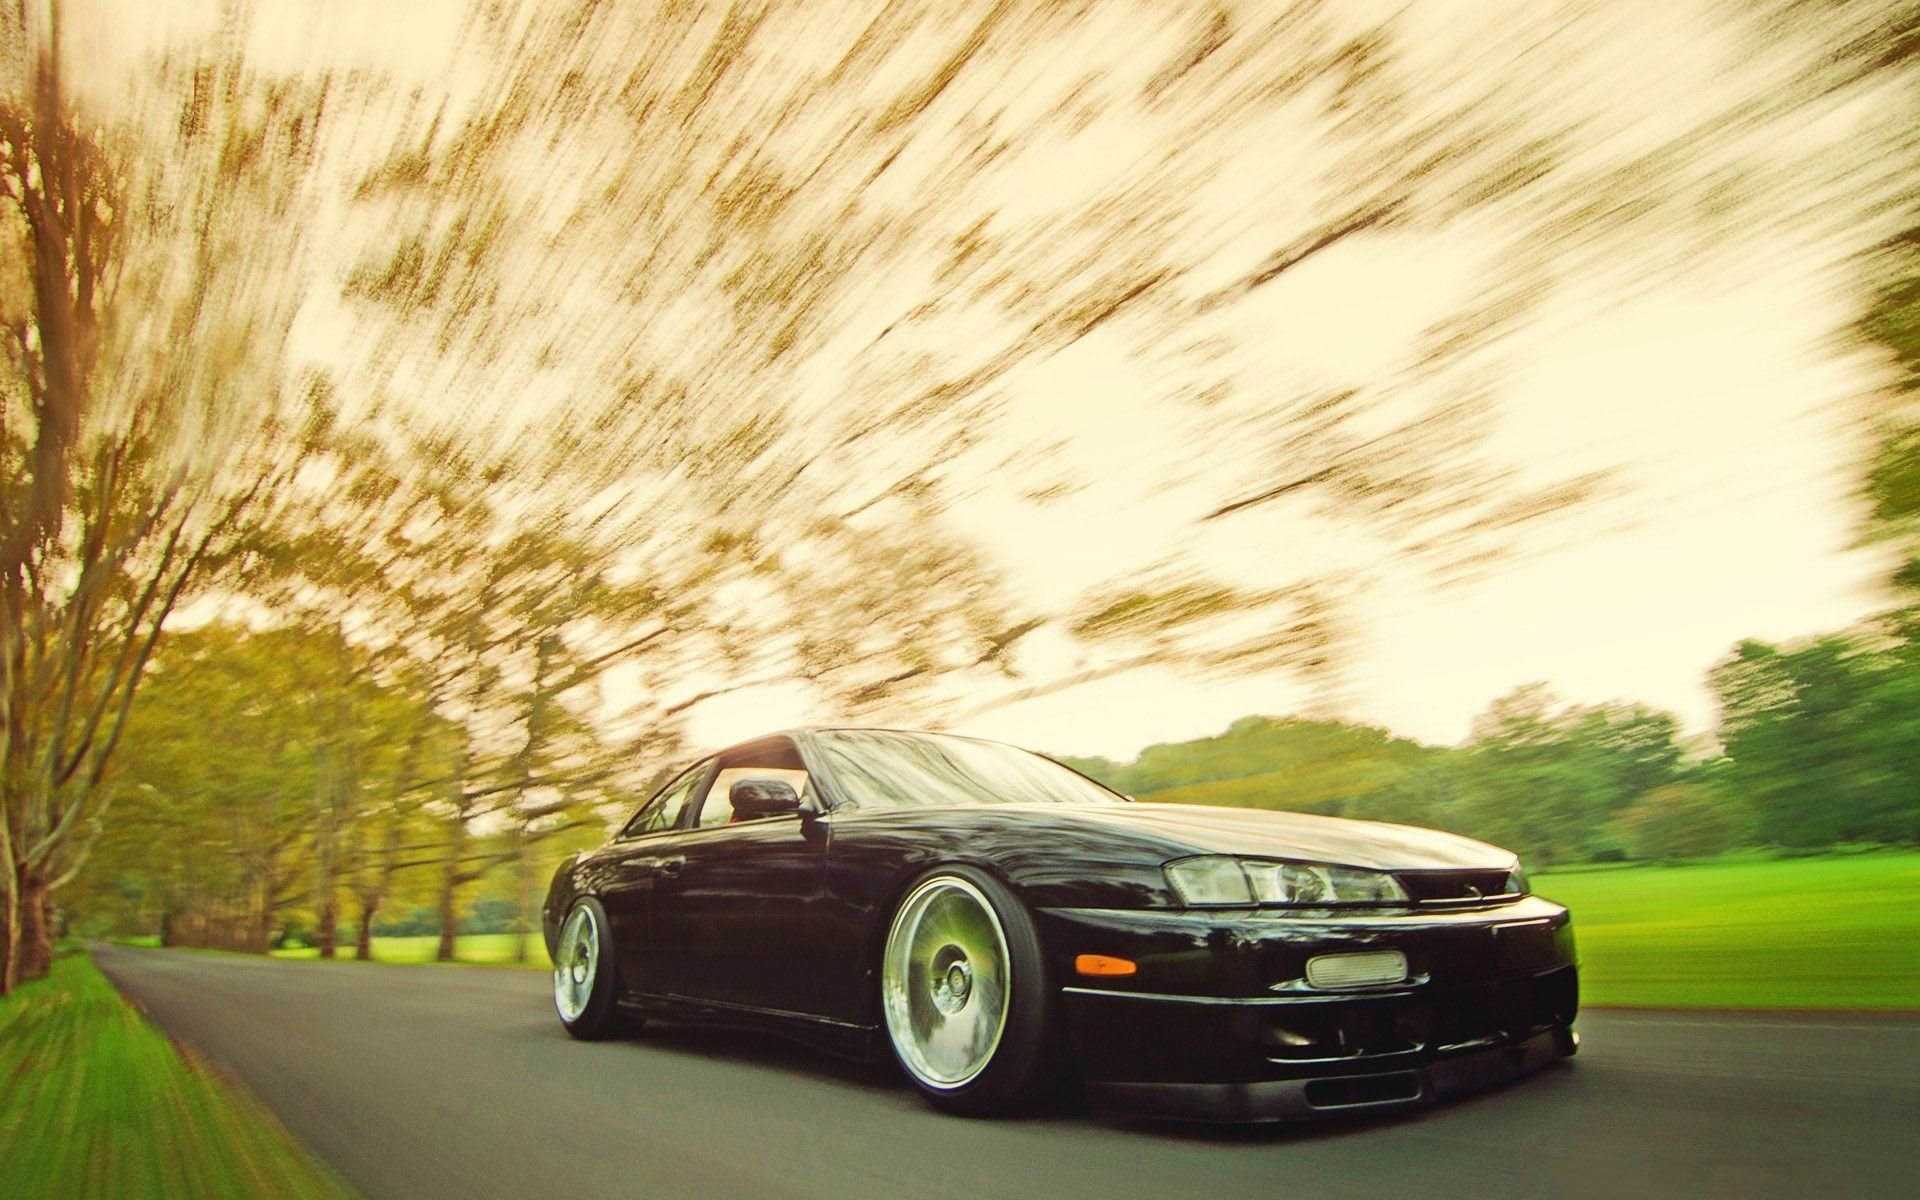 Nissan Silvia Background KoLPaPer Awesome Free HD Wallpapers